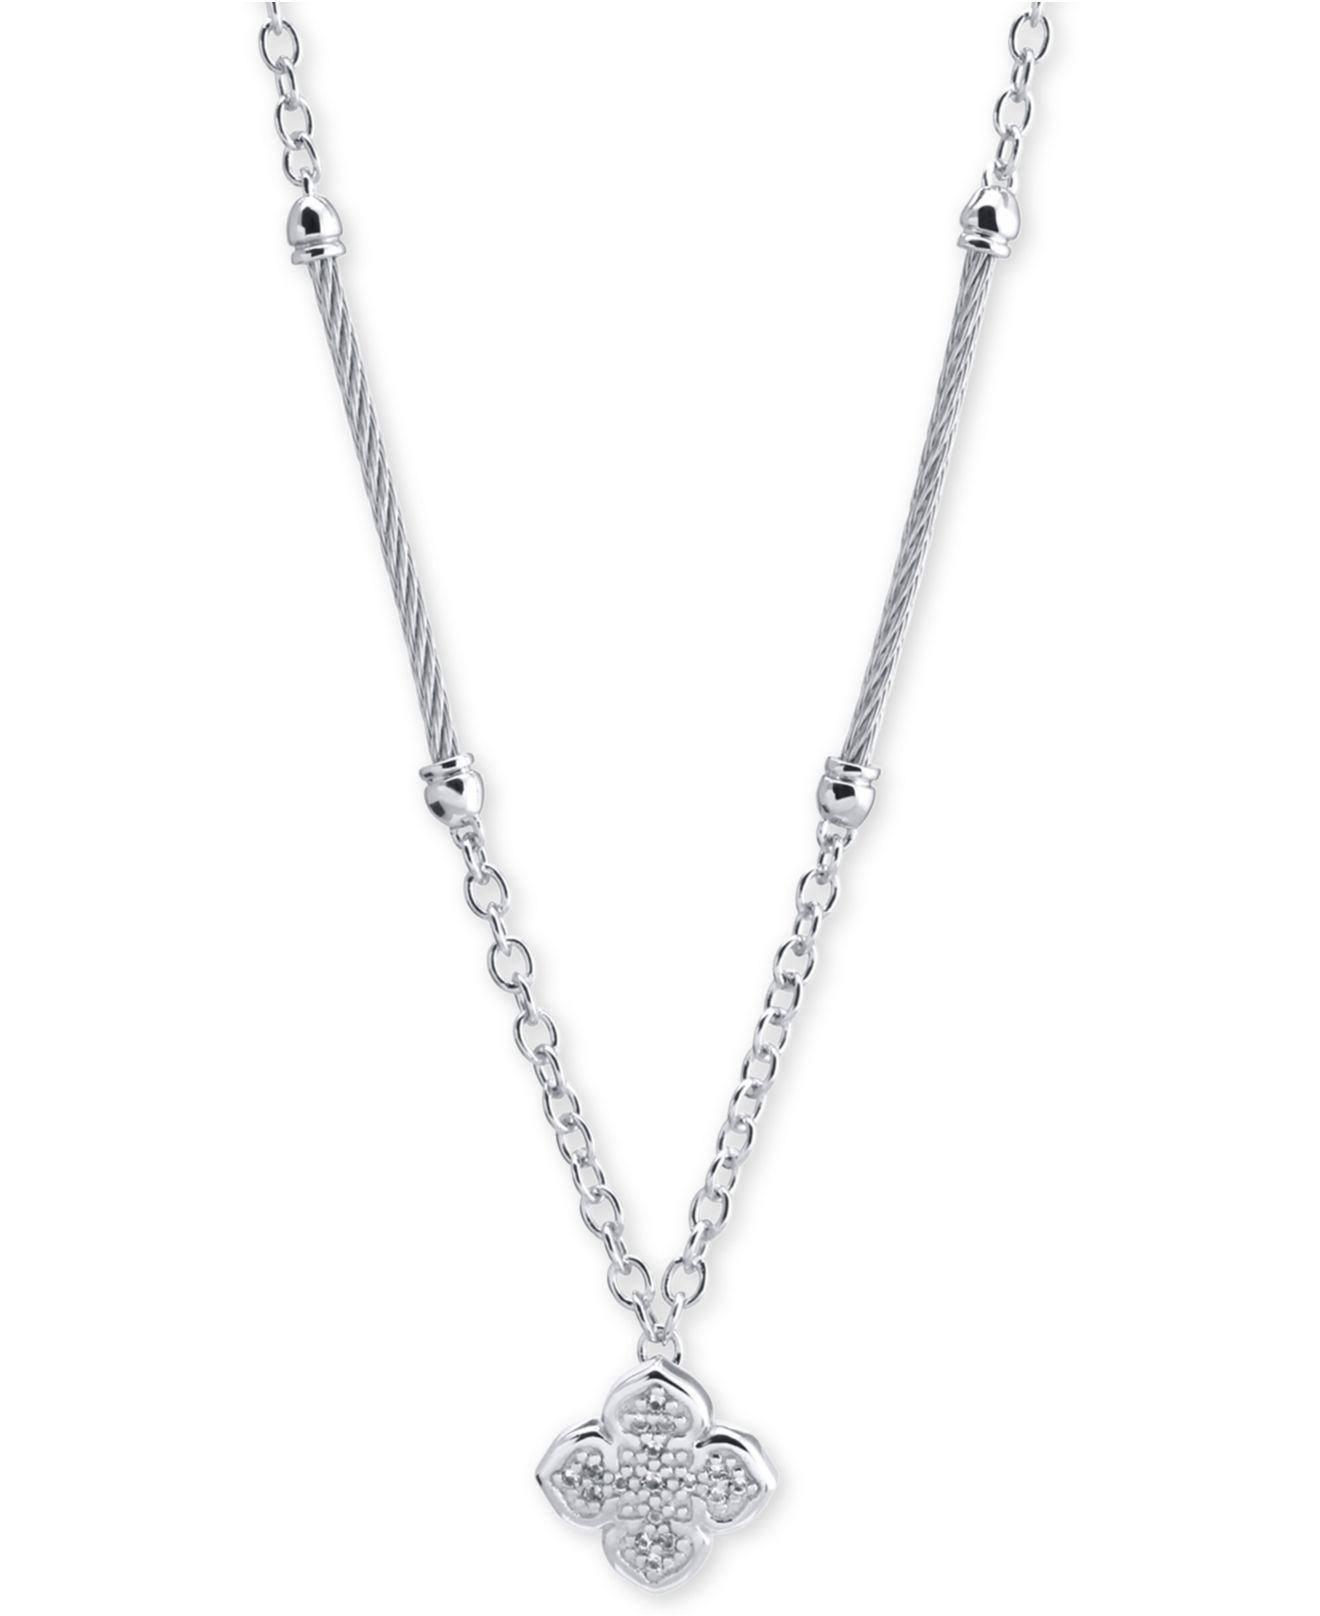 Charriol Le Fleur Silver Necklace With White Topaz, Stainless Steel ...